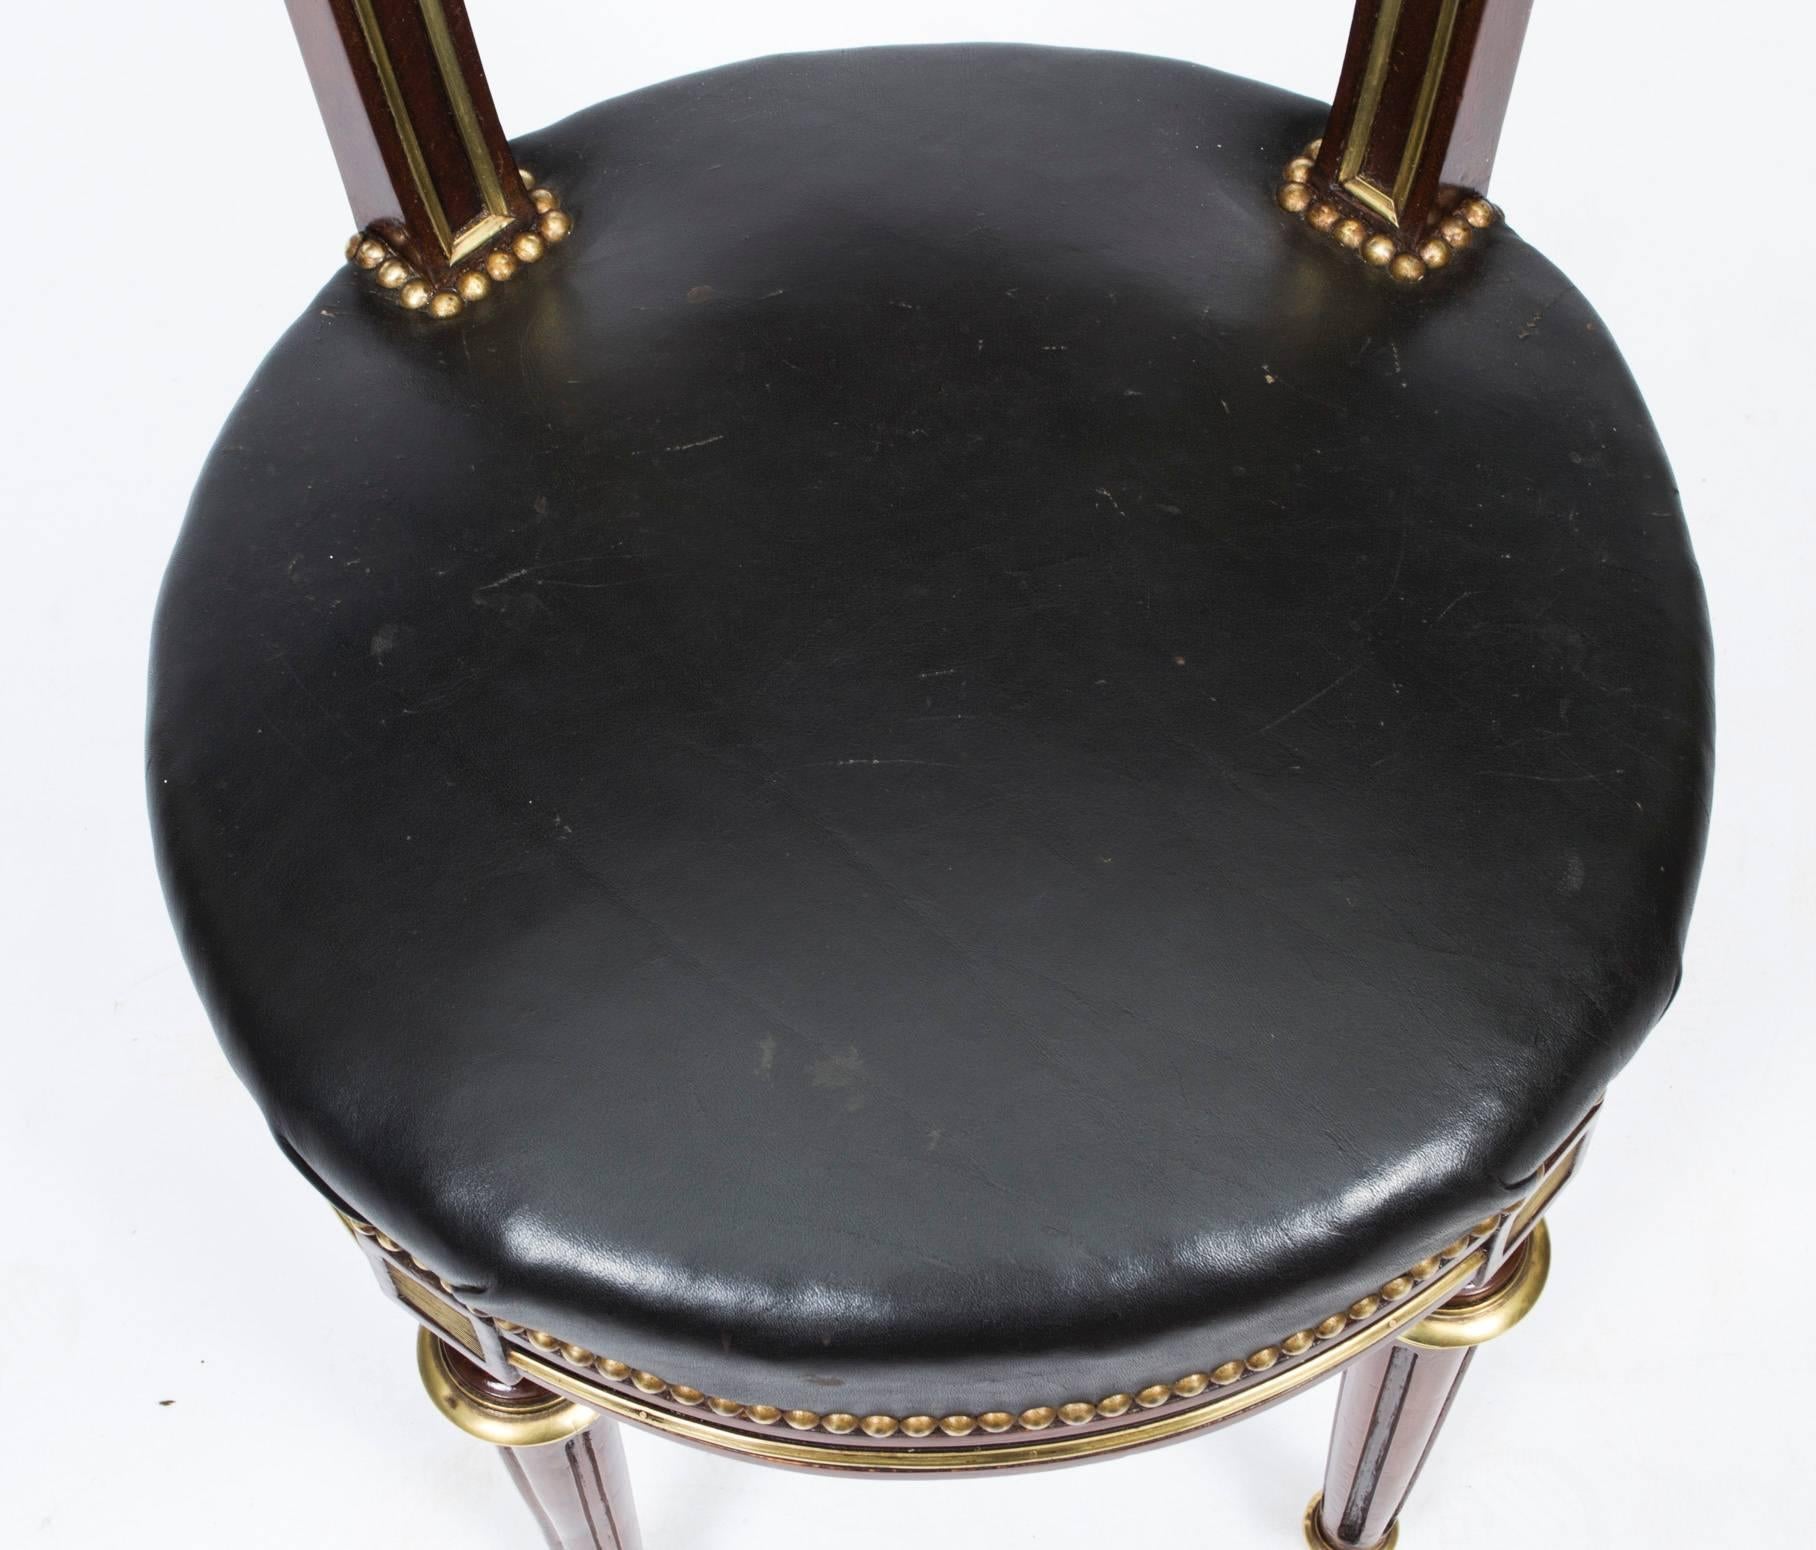 Late 19th Century Antique French Empire Brass Inlaid Desk Music Chair, circa 1880